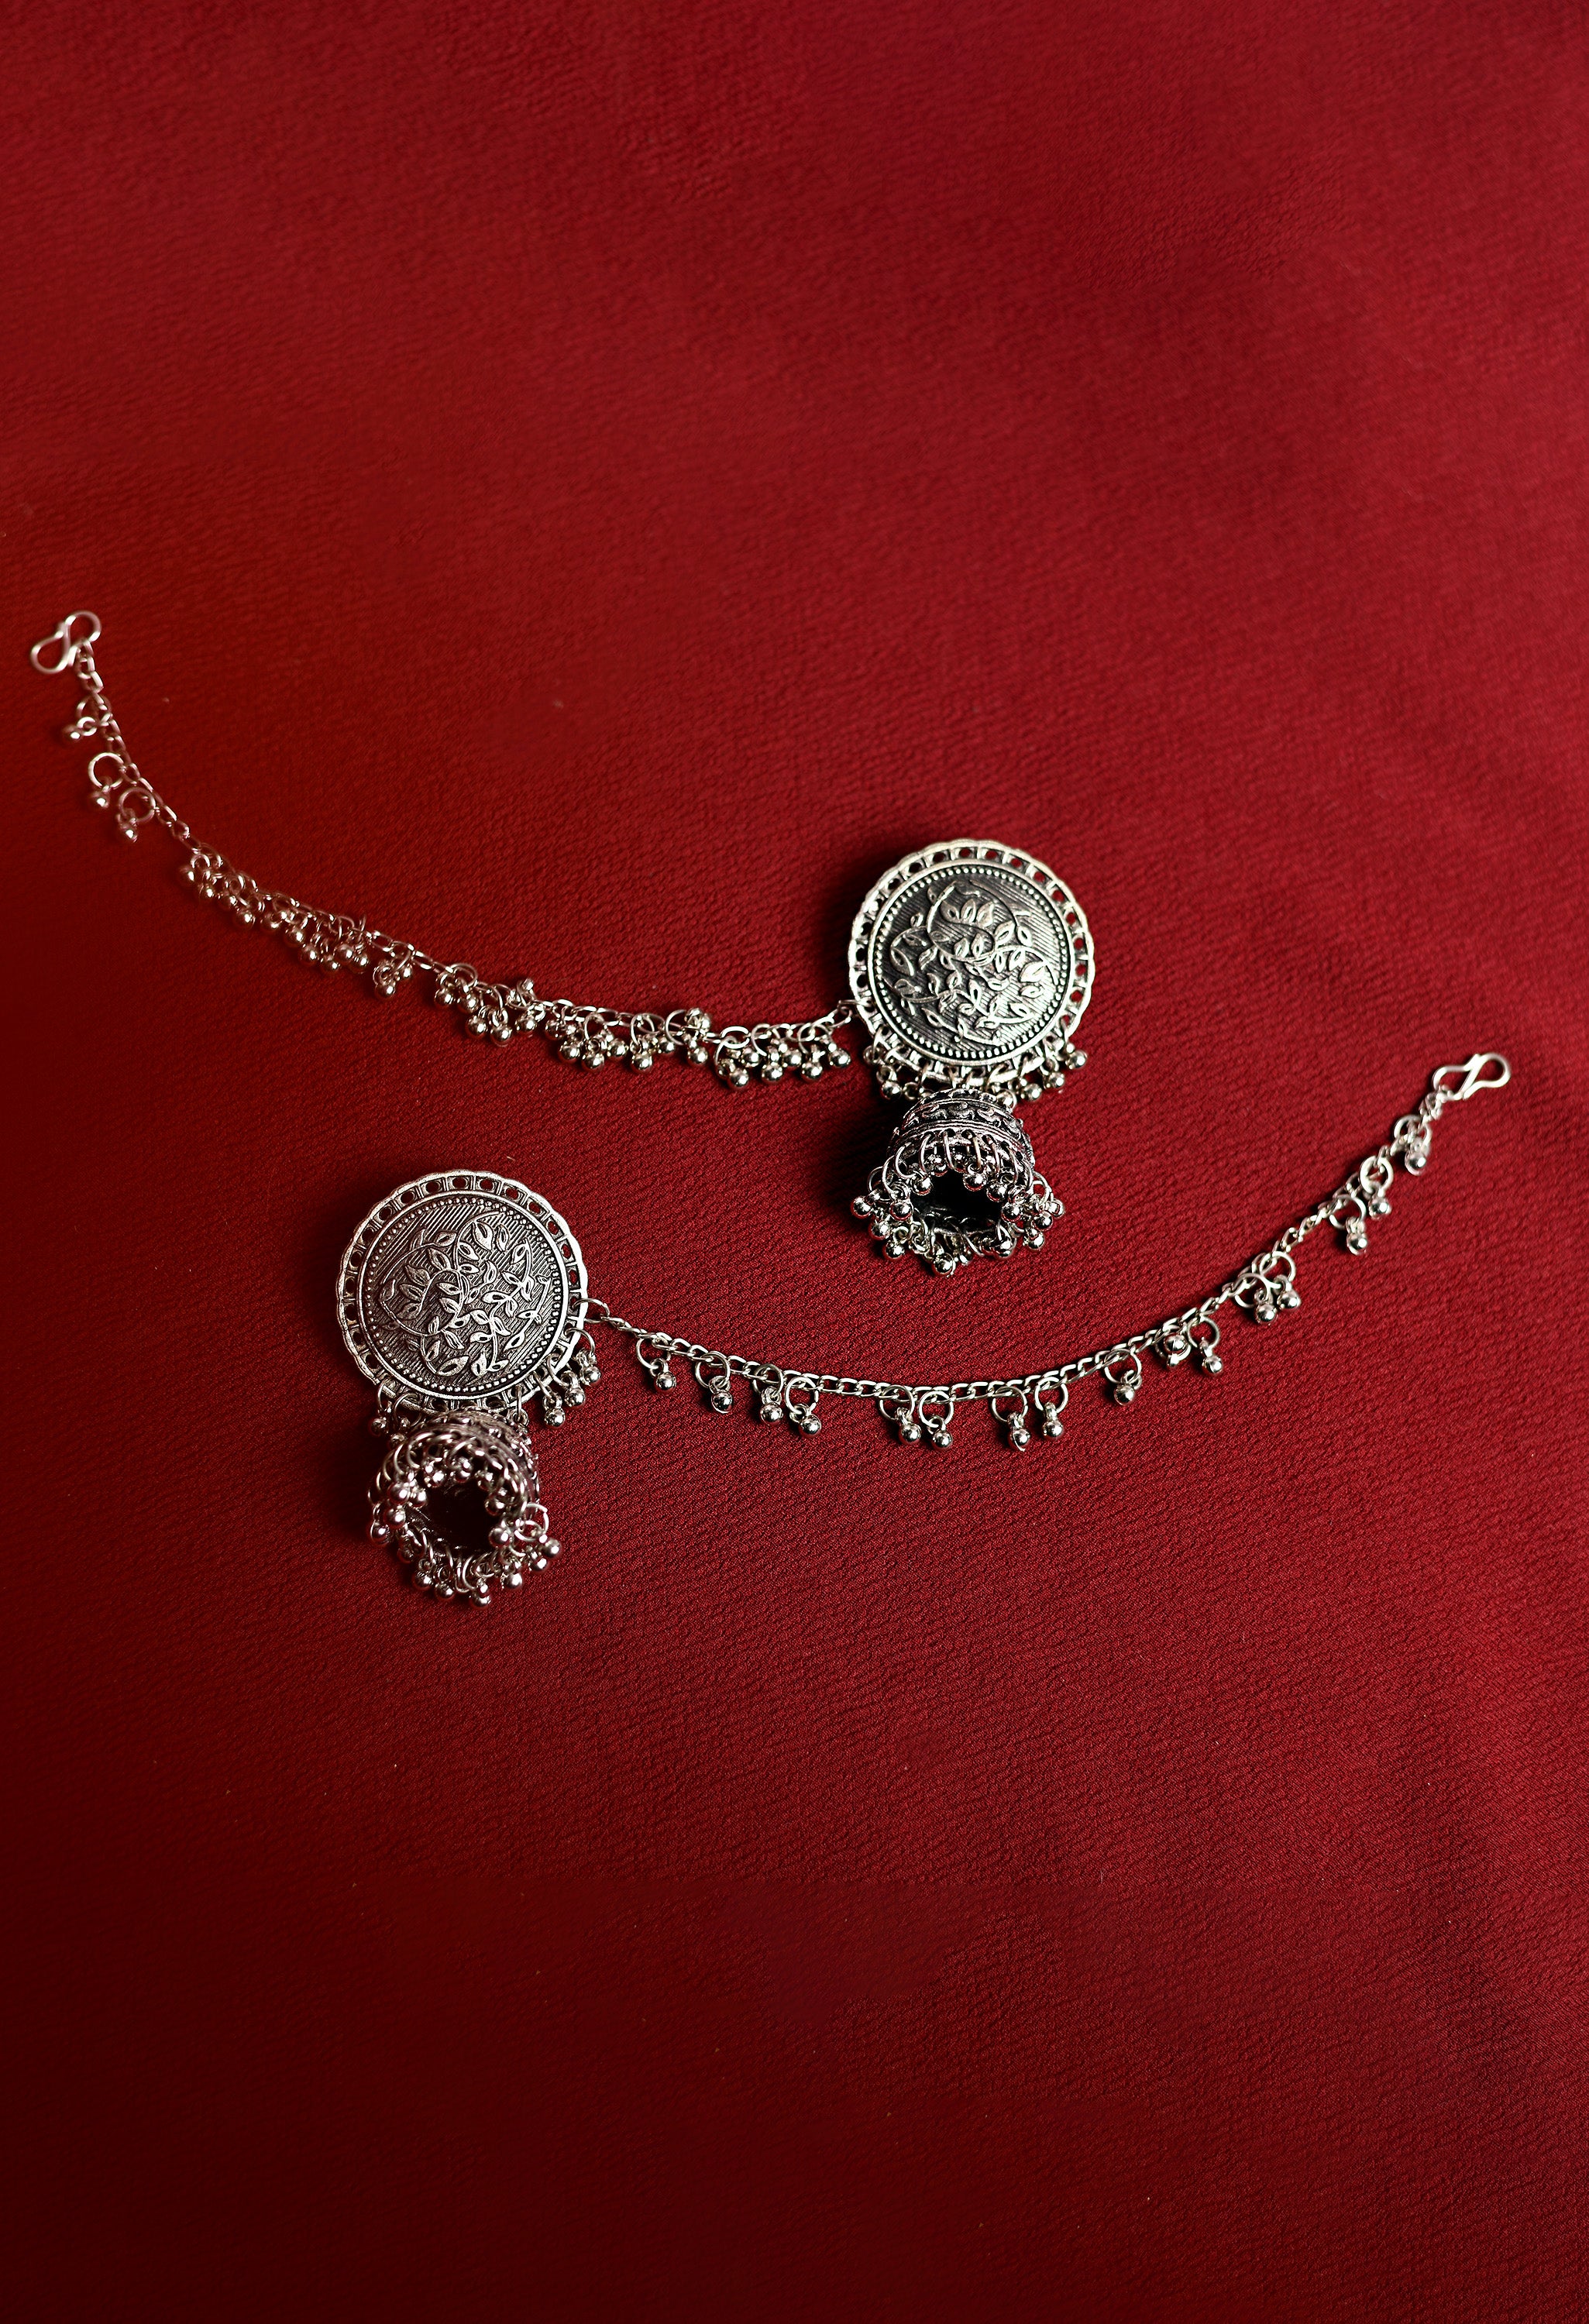 Women's Silver Colour Earrings With Chain And Jhumki Style - Tehzeeb